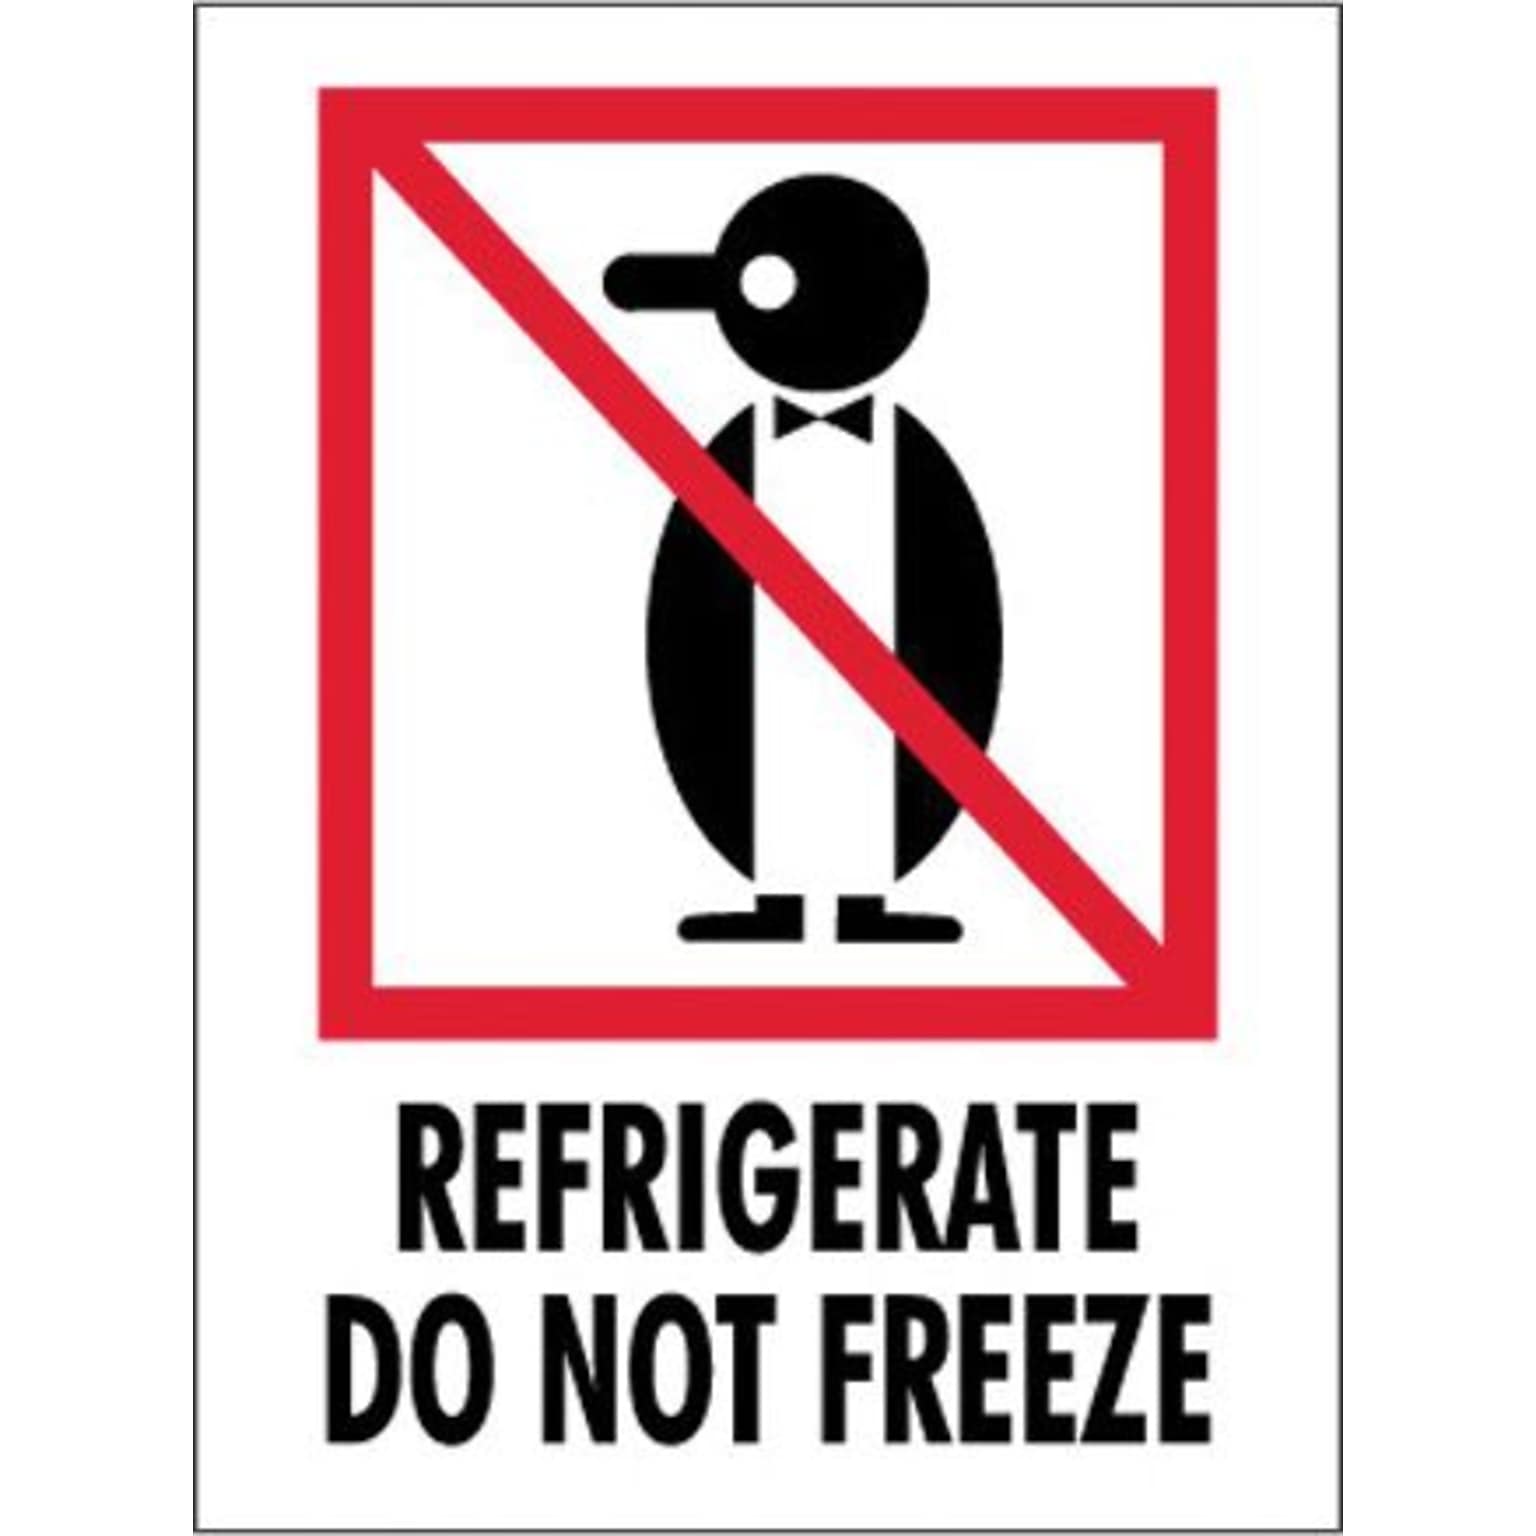 Tape Logic Refrigerate - Do Not Freeze Shipping Label, 3 x 4, 500/Roll